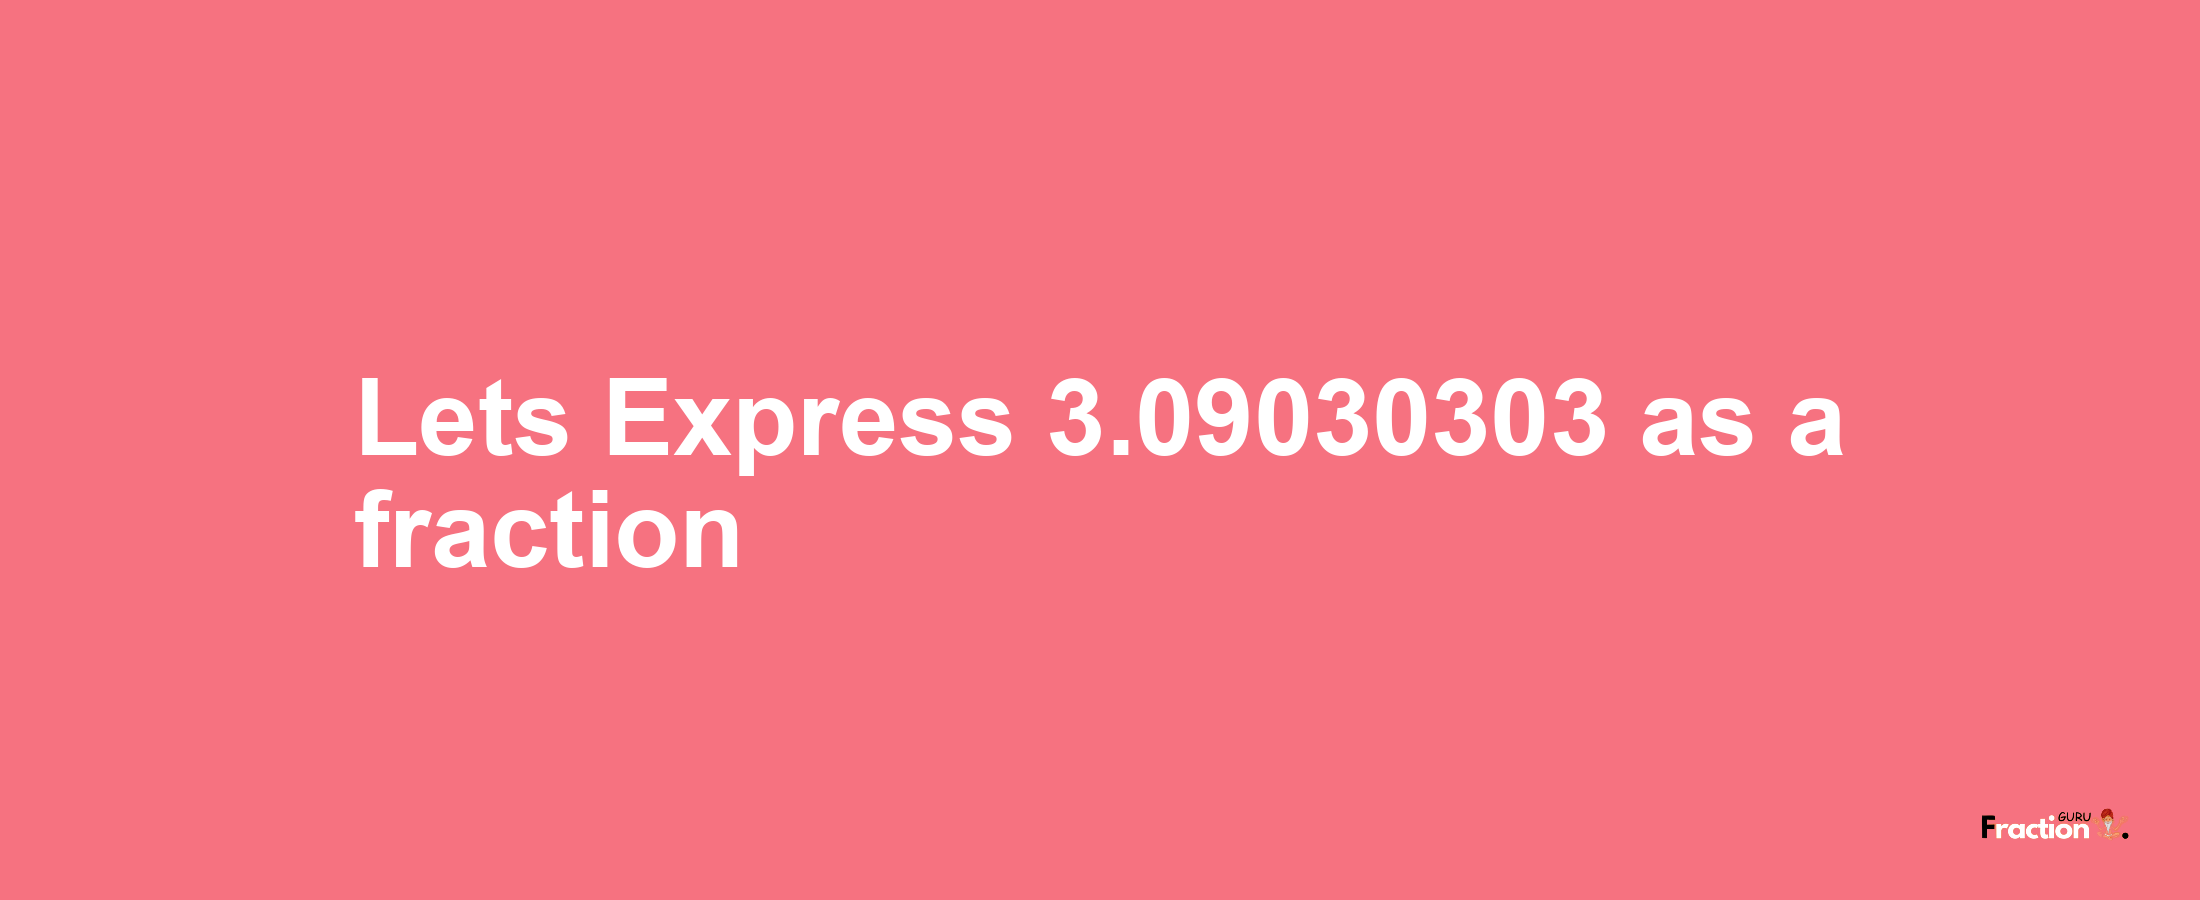 Lets Express 3.09030303 as afraction